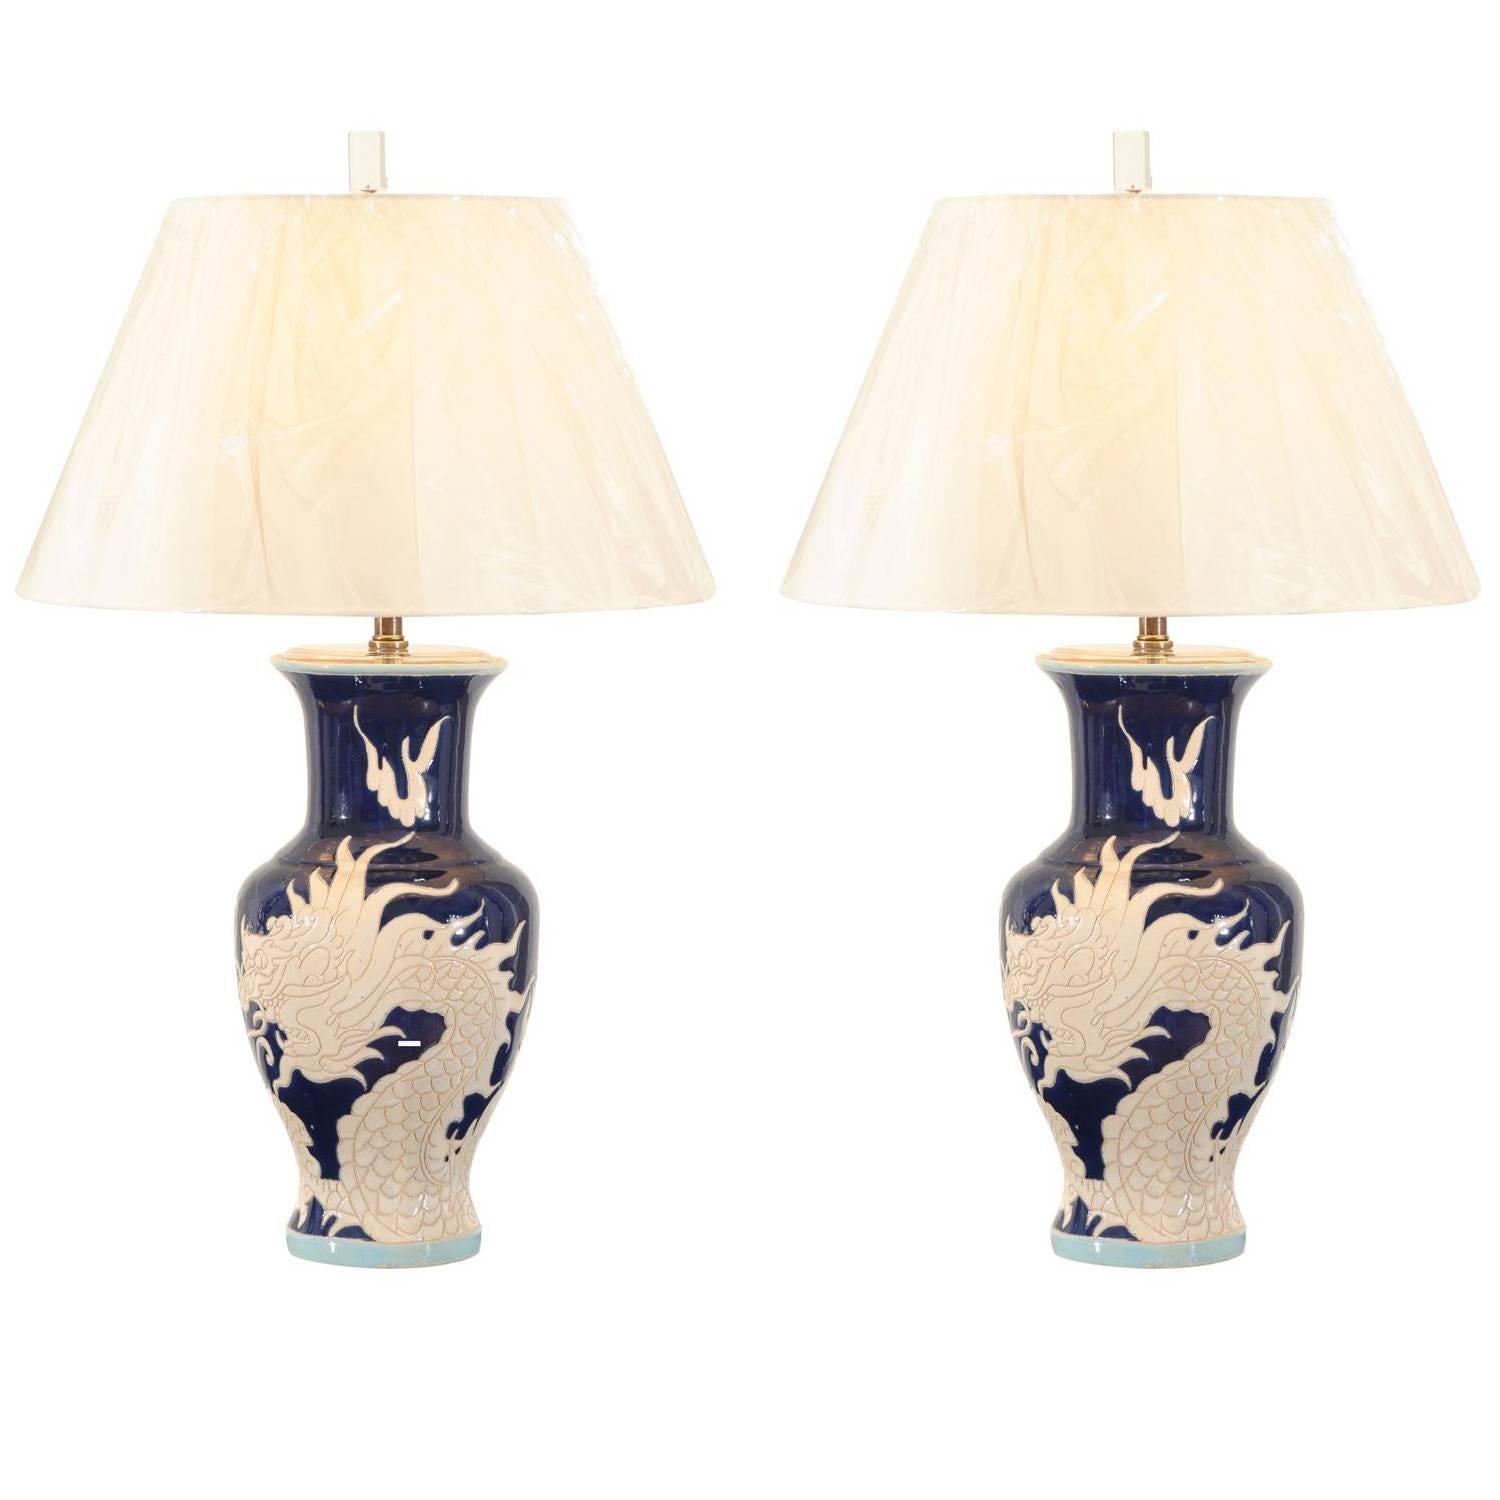 Restored Pair of Dramatic Vintage Dragon Lamps in Cobalt and Cream For Sale